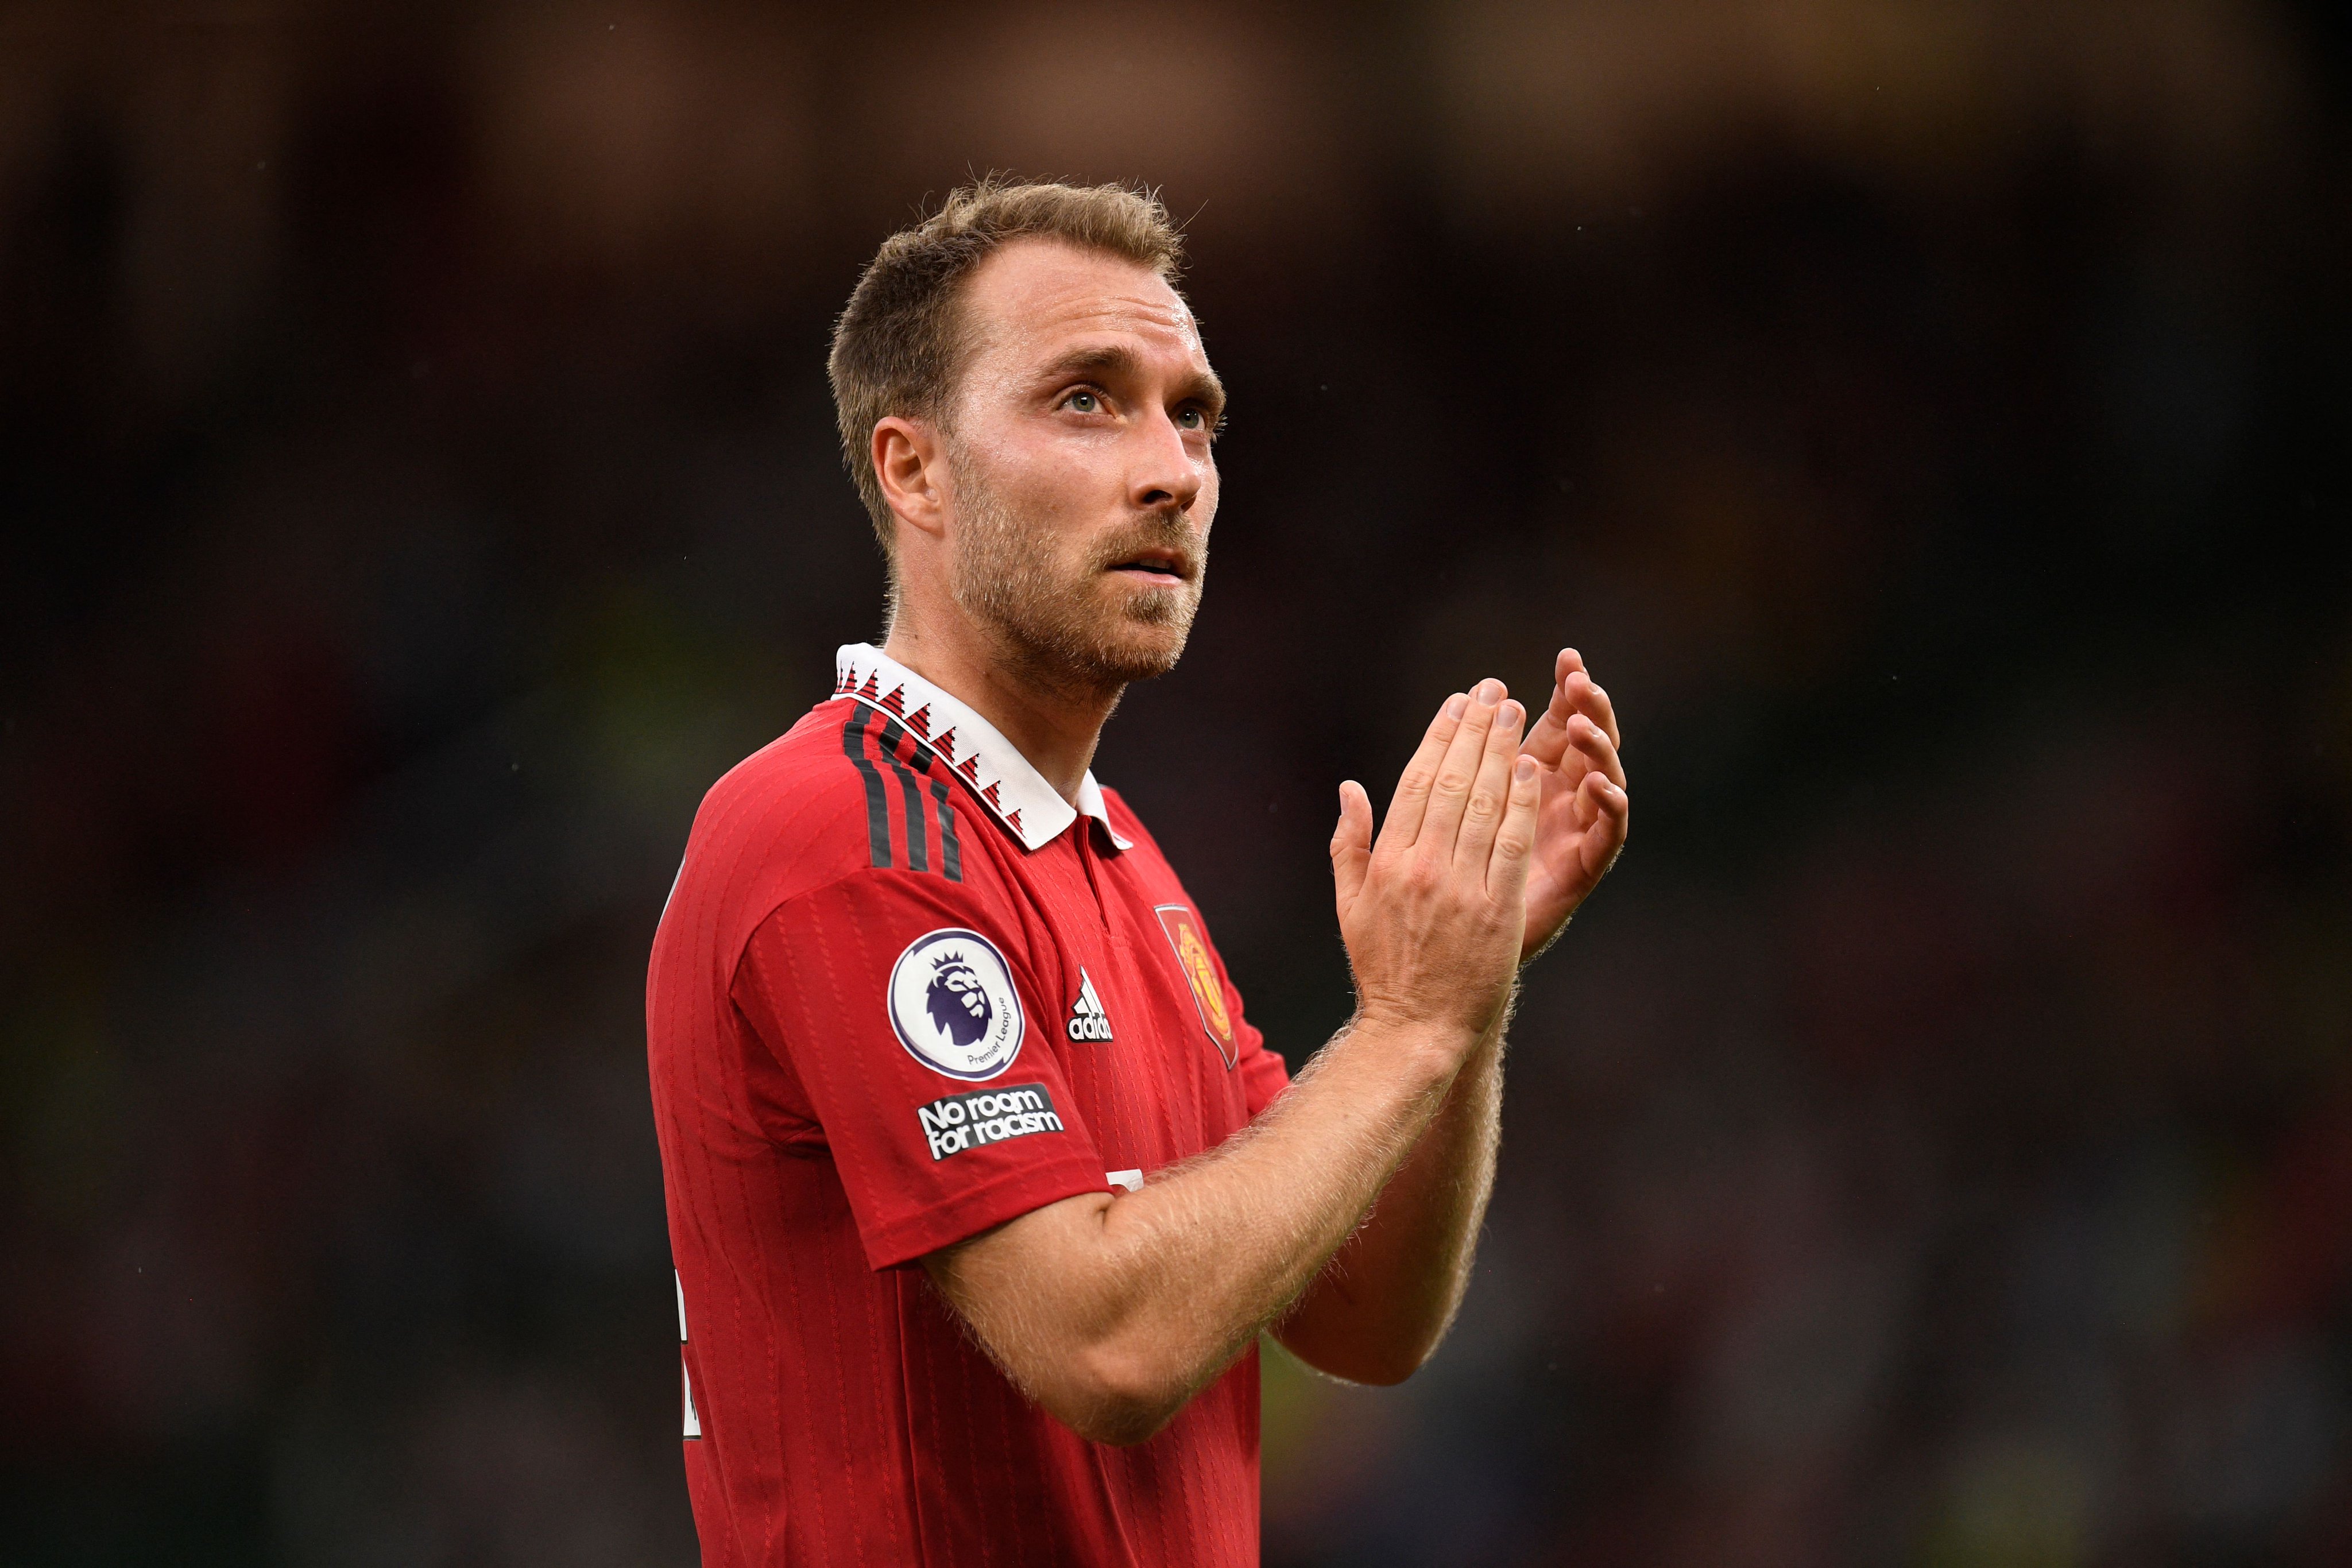 Christian Eriksen has changed the way that Manchester United play, implies Paul Scholes